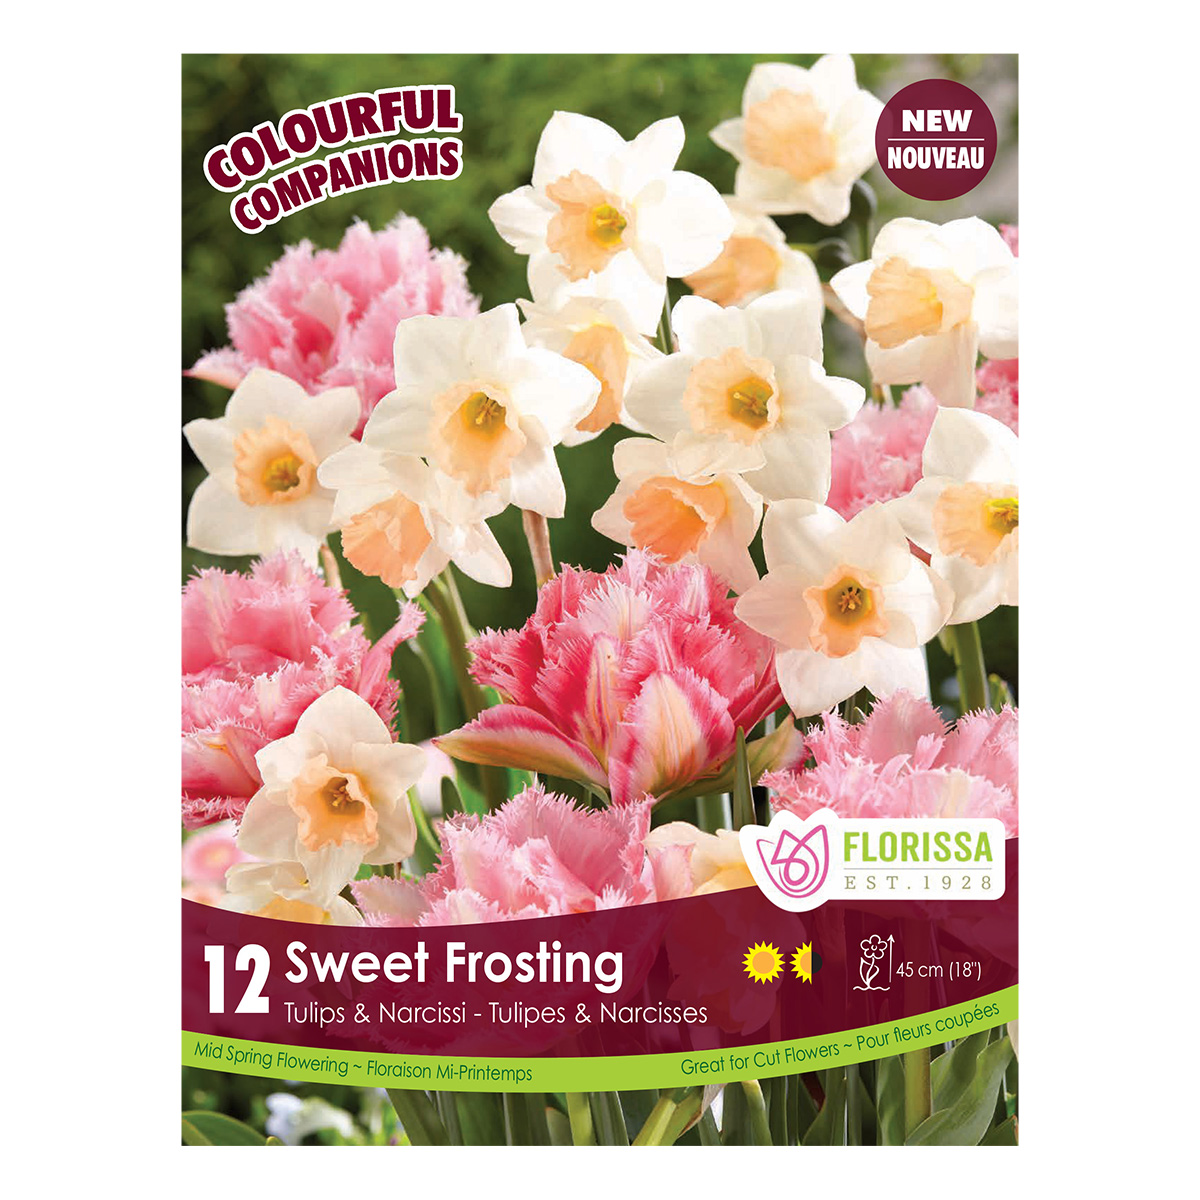 Colorful Companions 'Sweet Frosting'  12PK